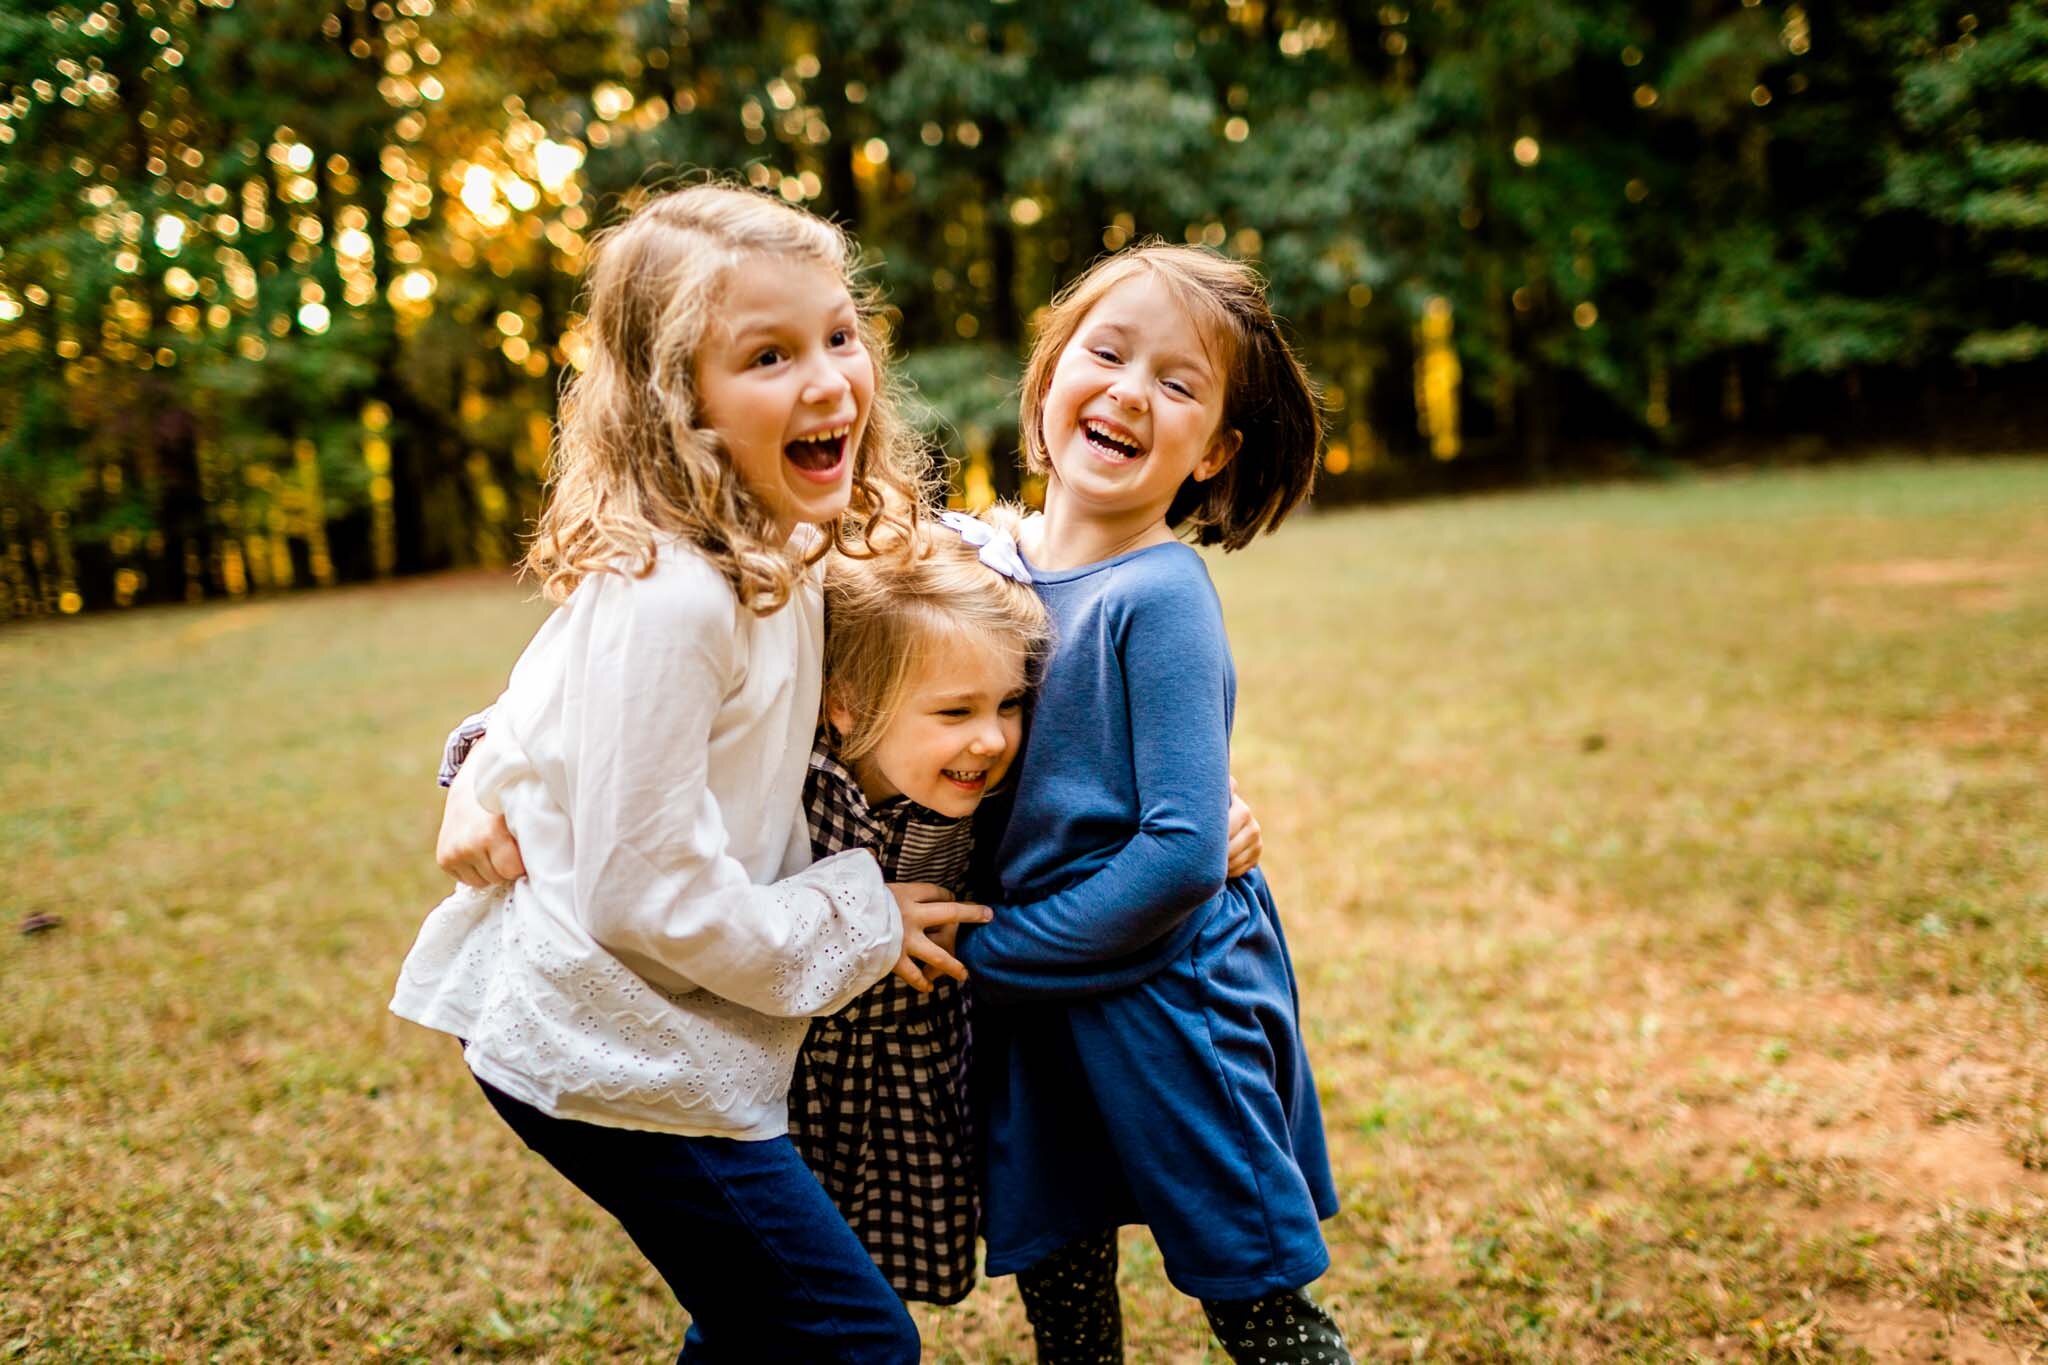 Raleigh Family Photographer | Umstead Park | By G. Lin Photography | Young girls laughing